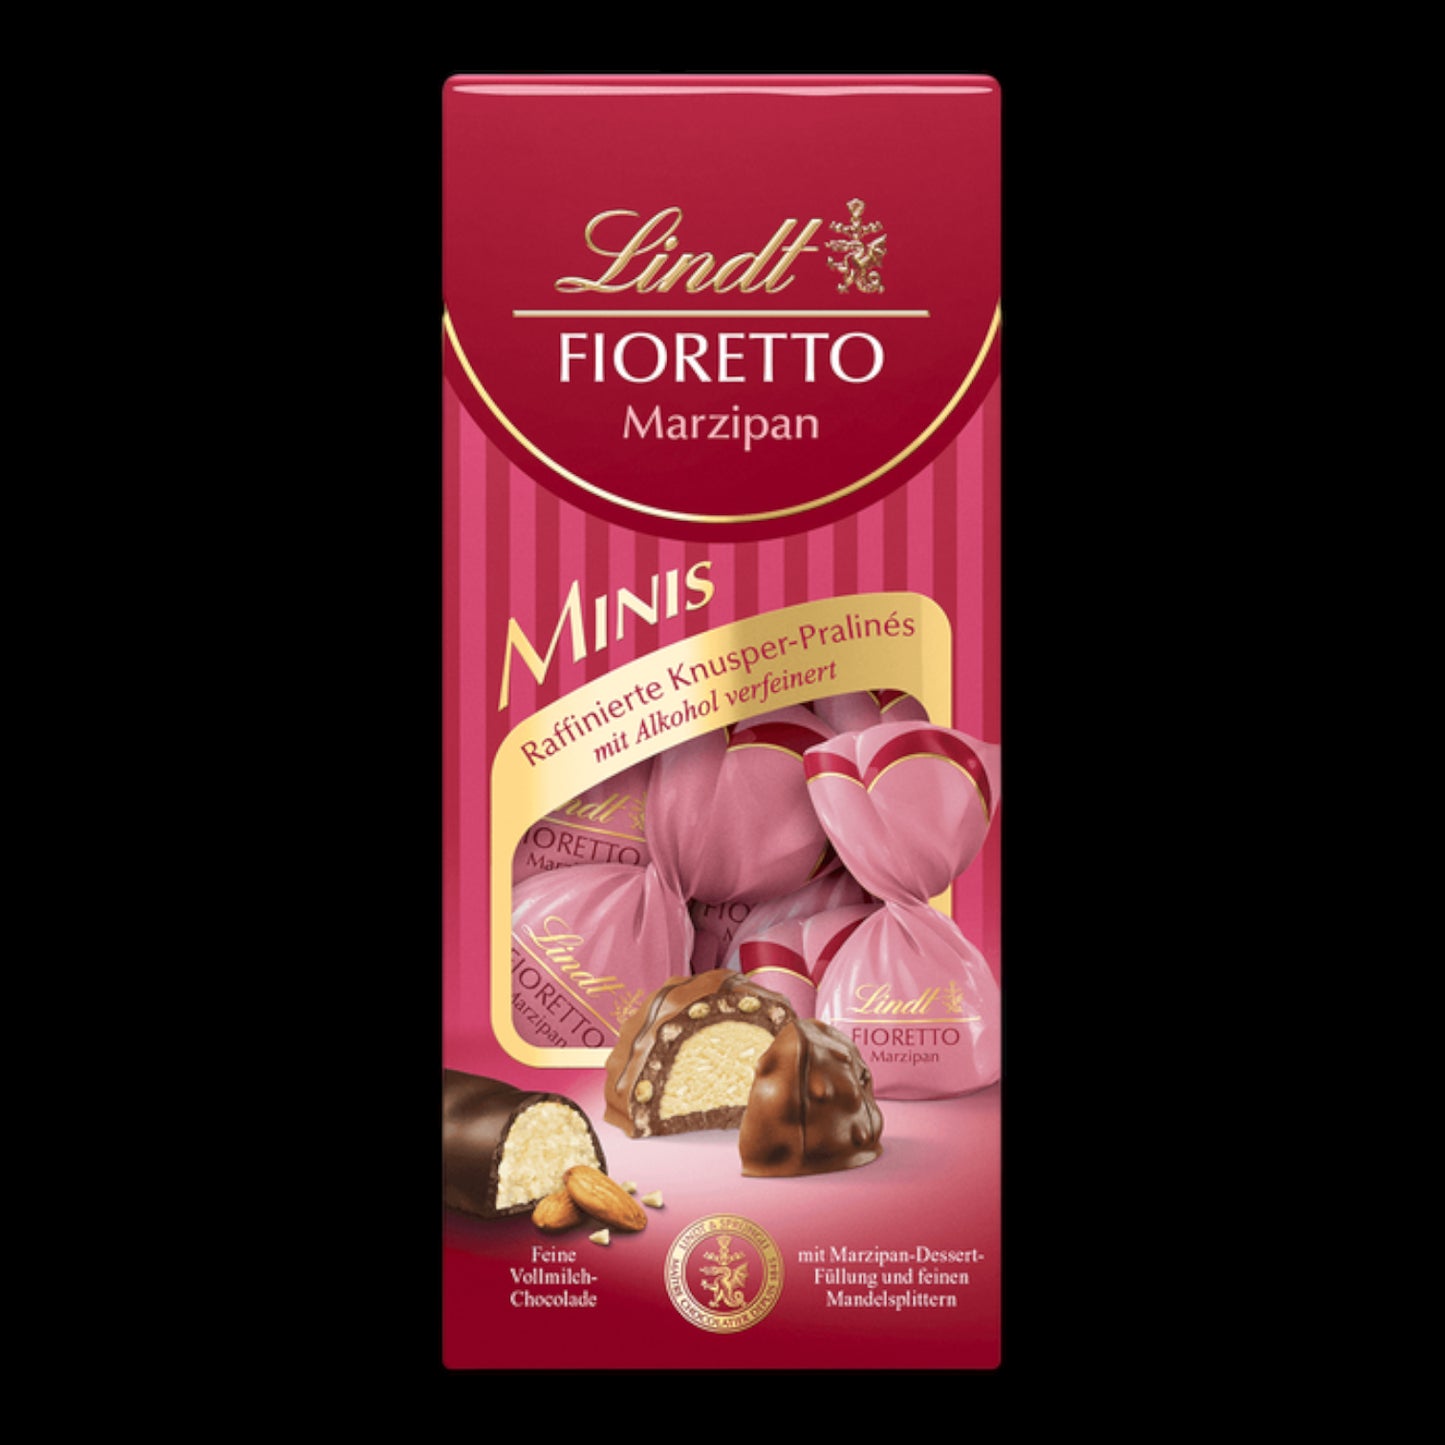 Lindt Fioretto Marzipan Minis 115g